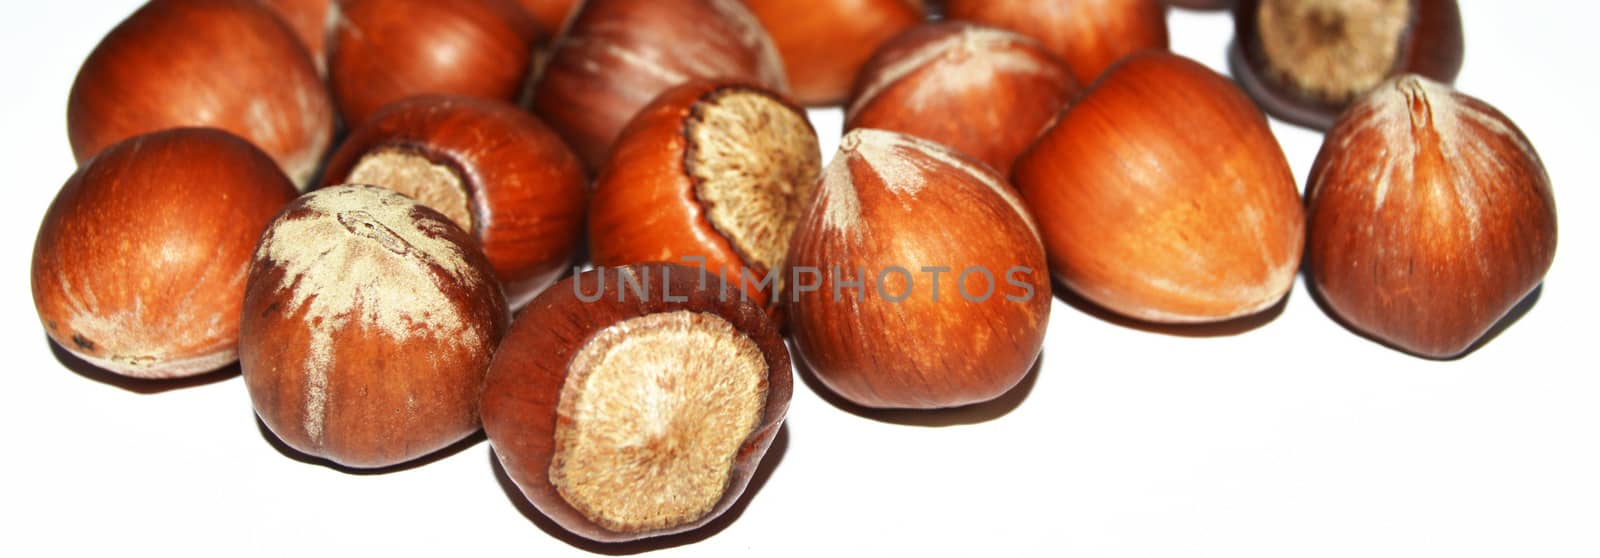 The new fresh shelled nuts pictures by nhatipoglu